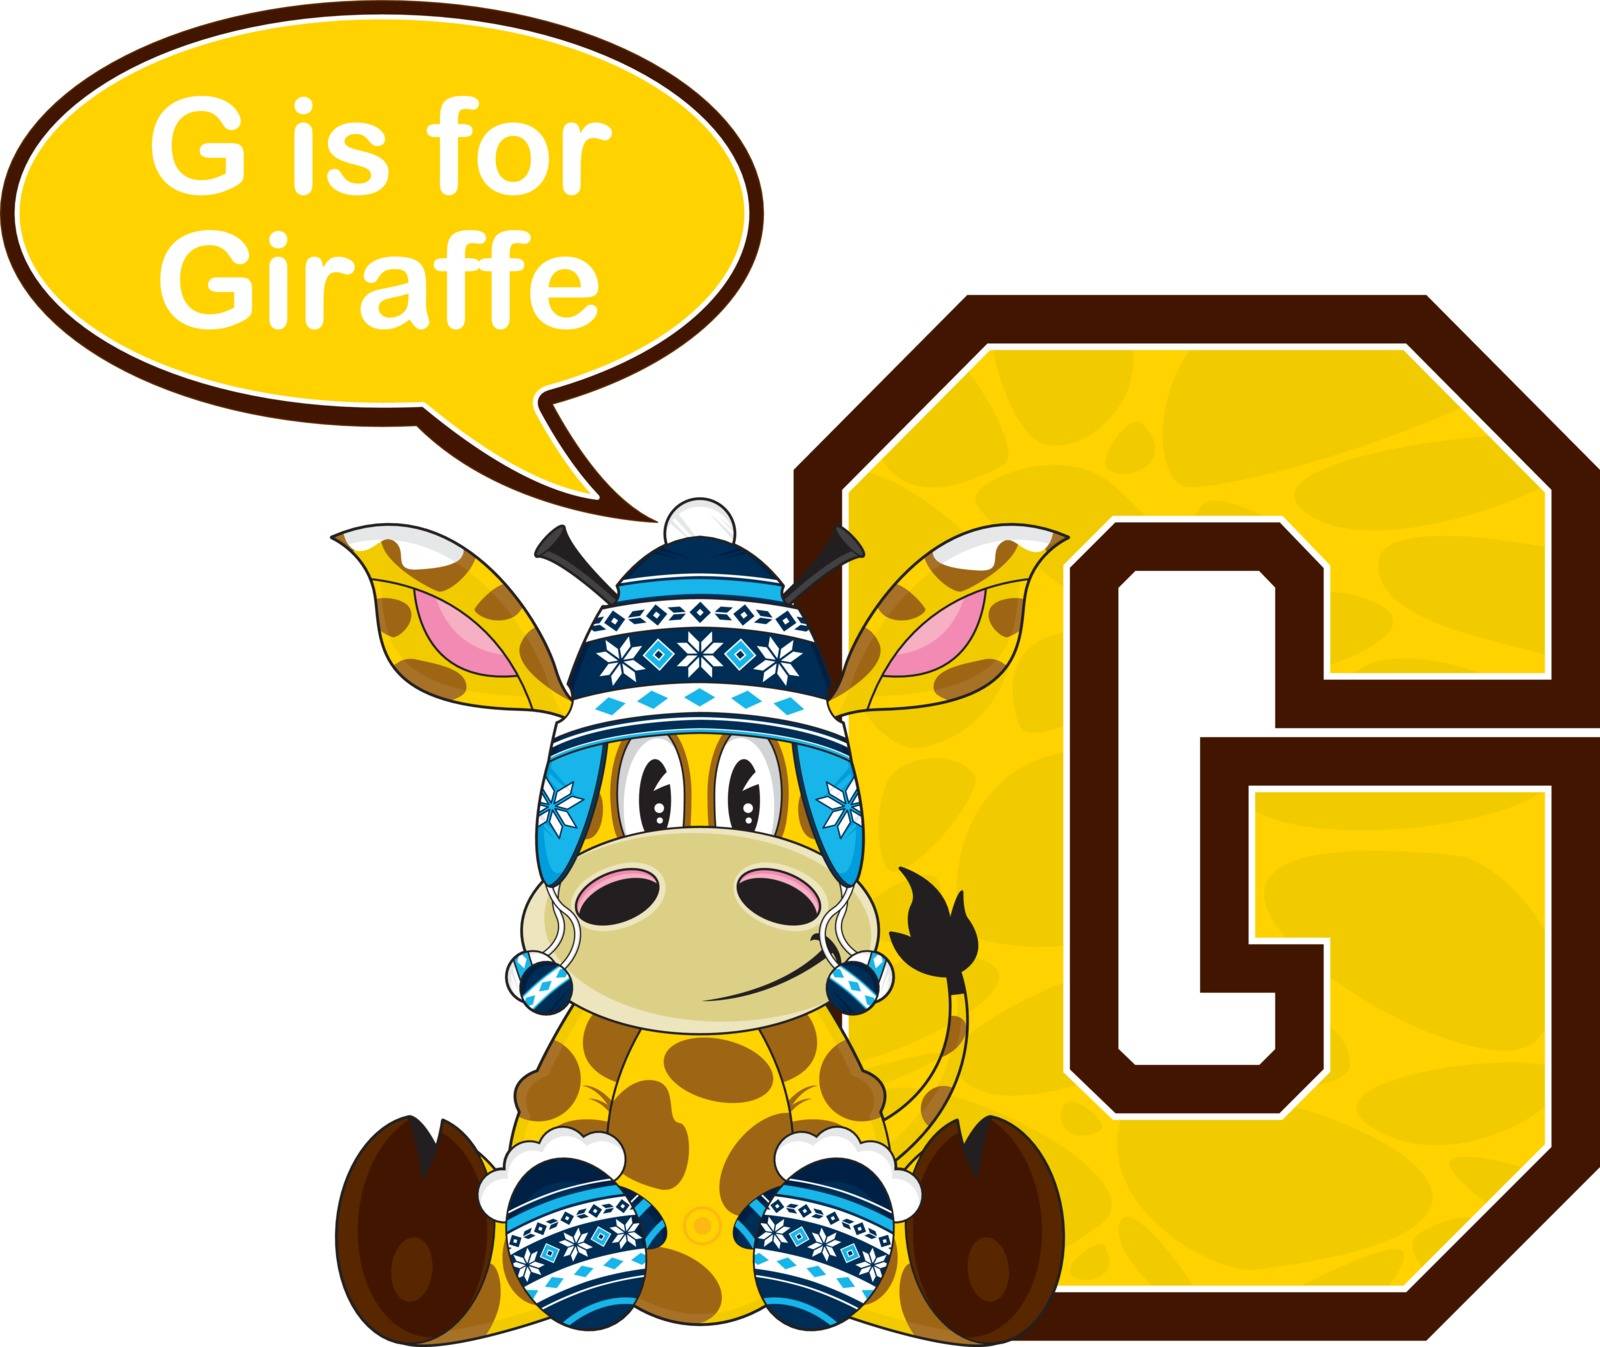 Cute Cartoon G is for Giraffe in Wooly Hat Alphabet Learning Illustration - By Mark Murphy Creative